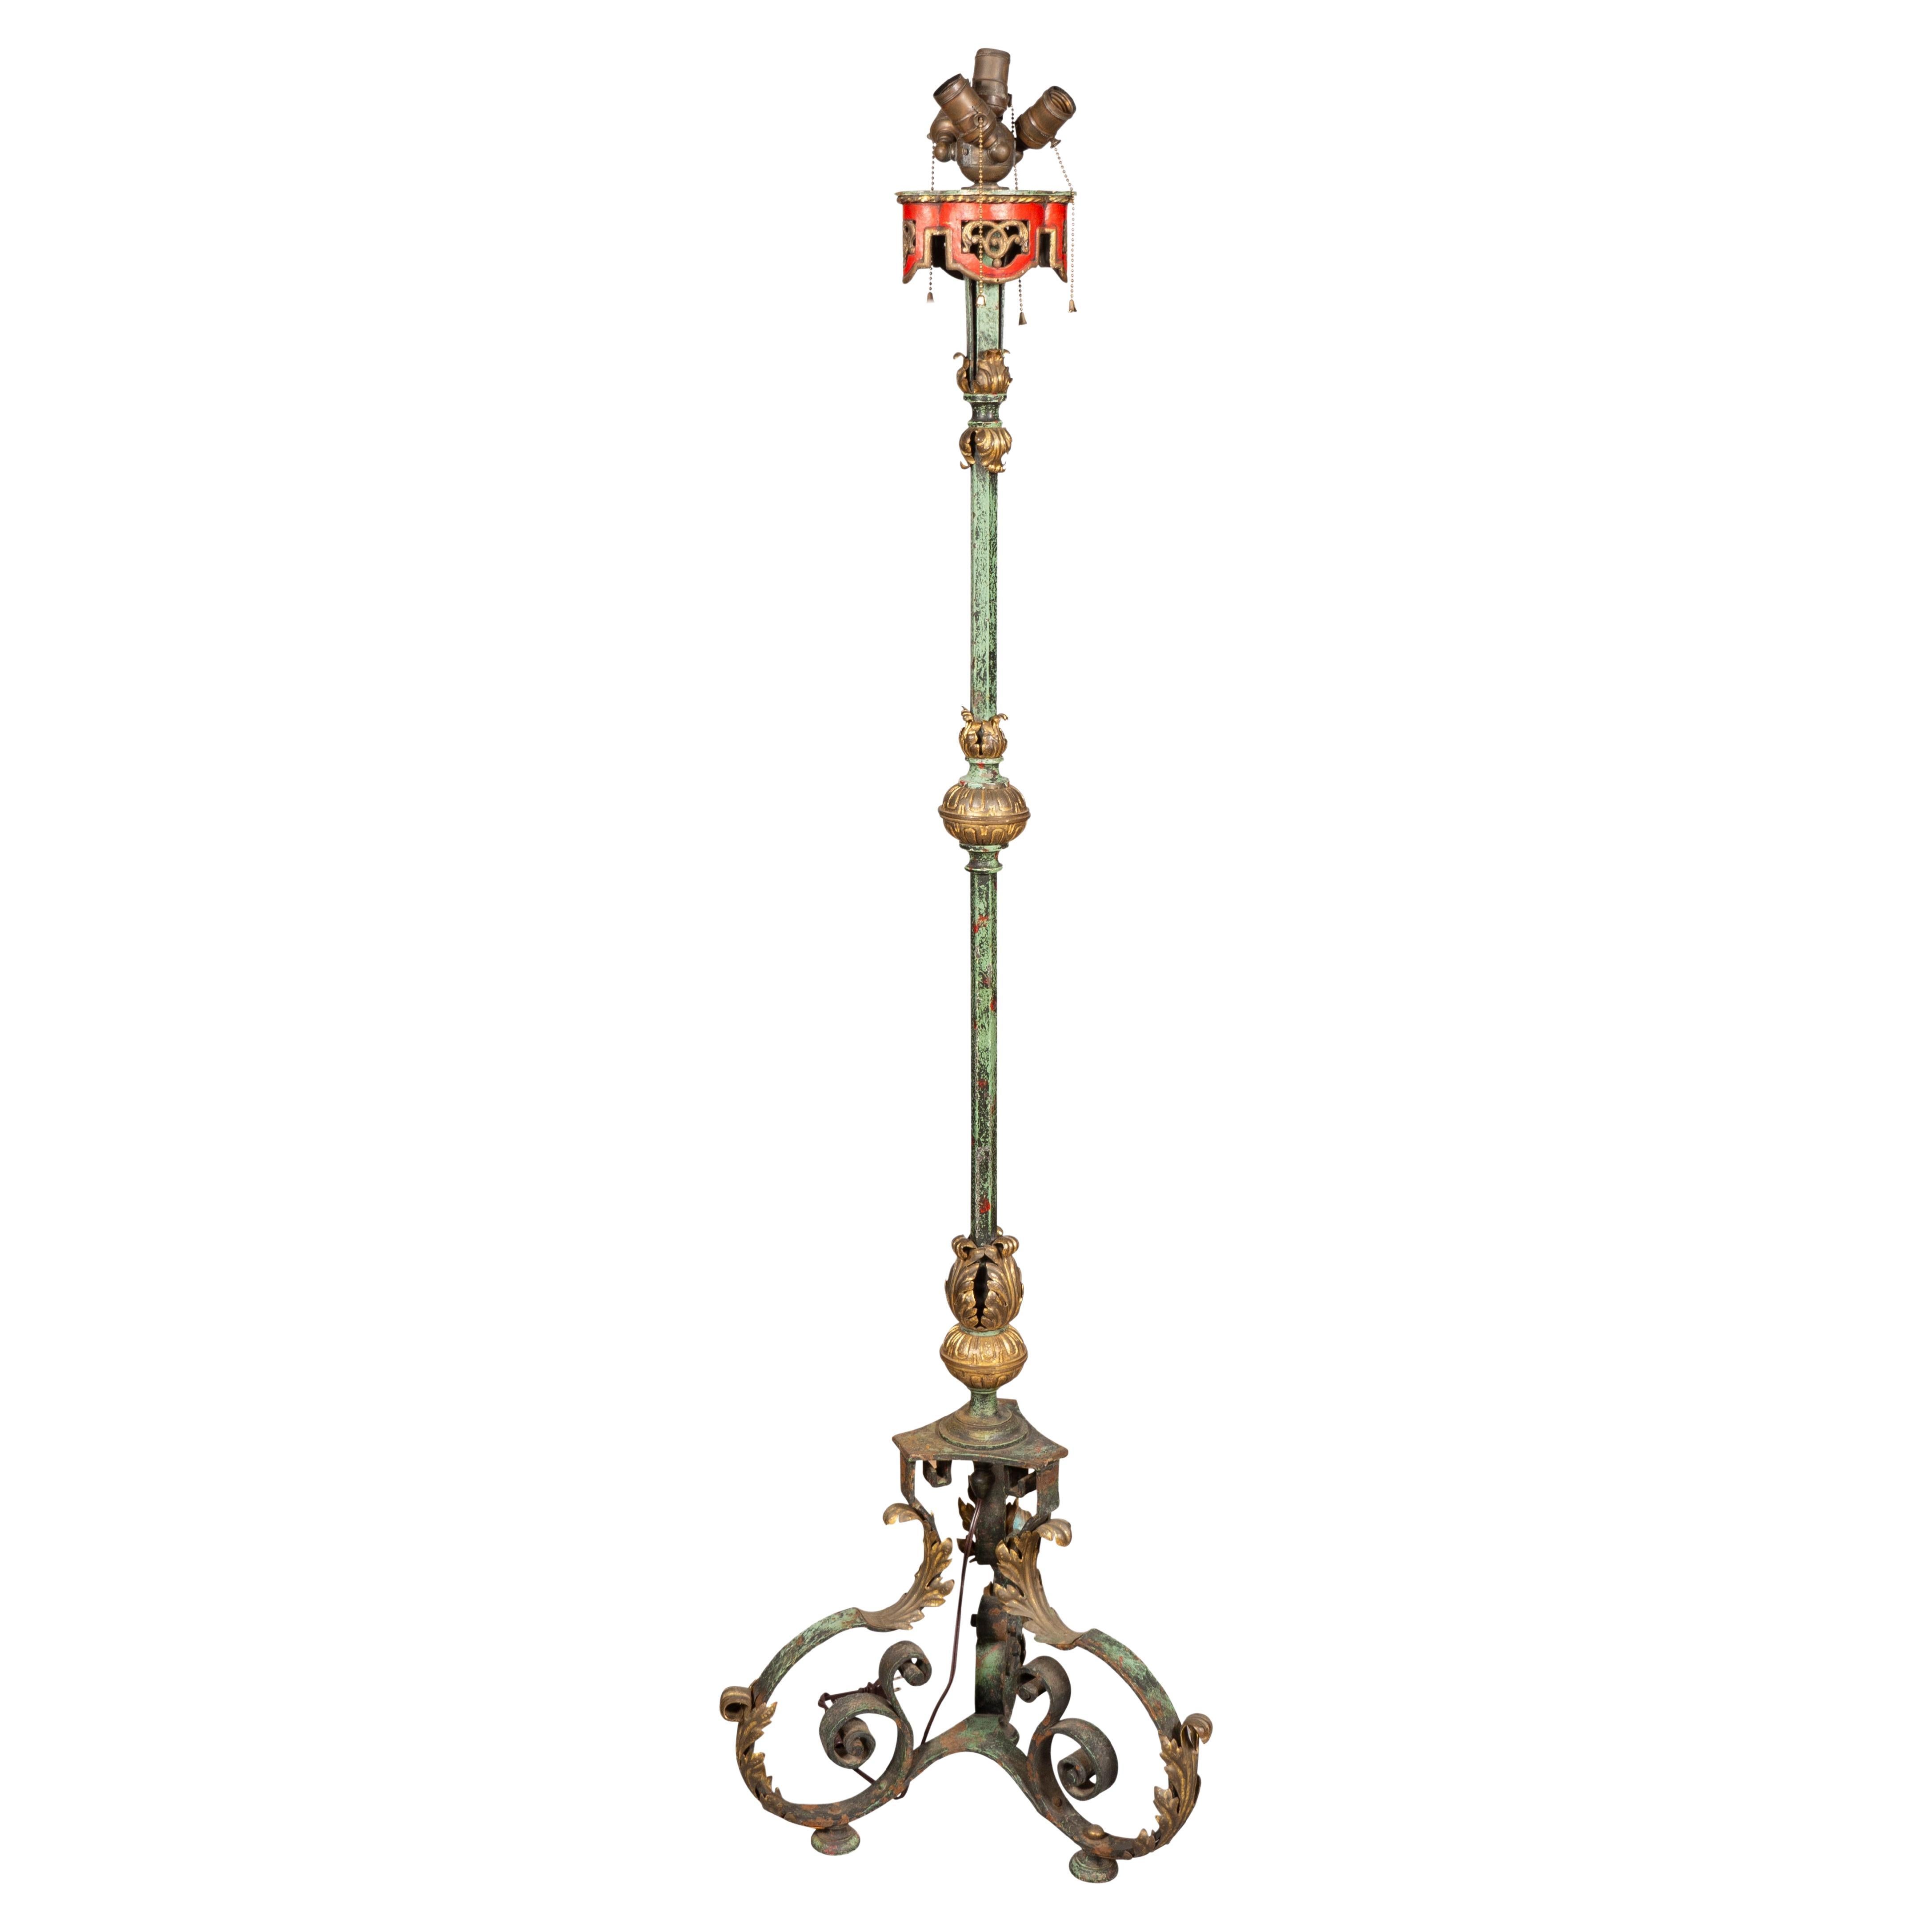 Renaissance Revival Brass And Iron Floor Lamp For Sale